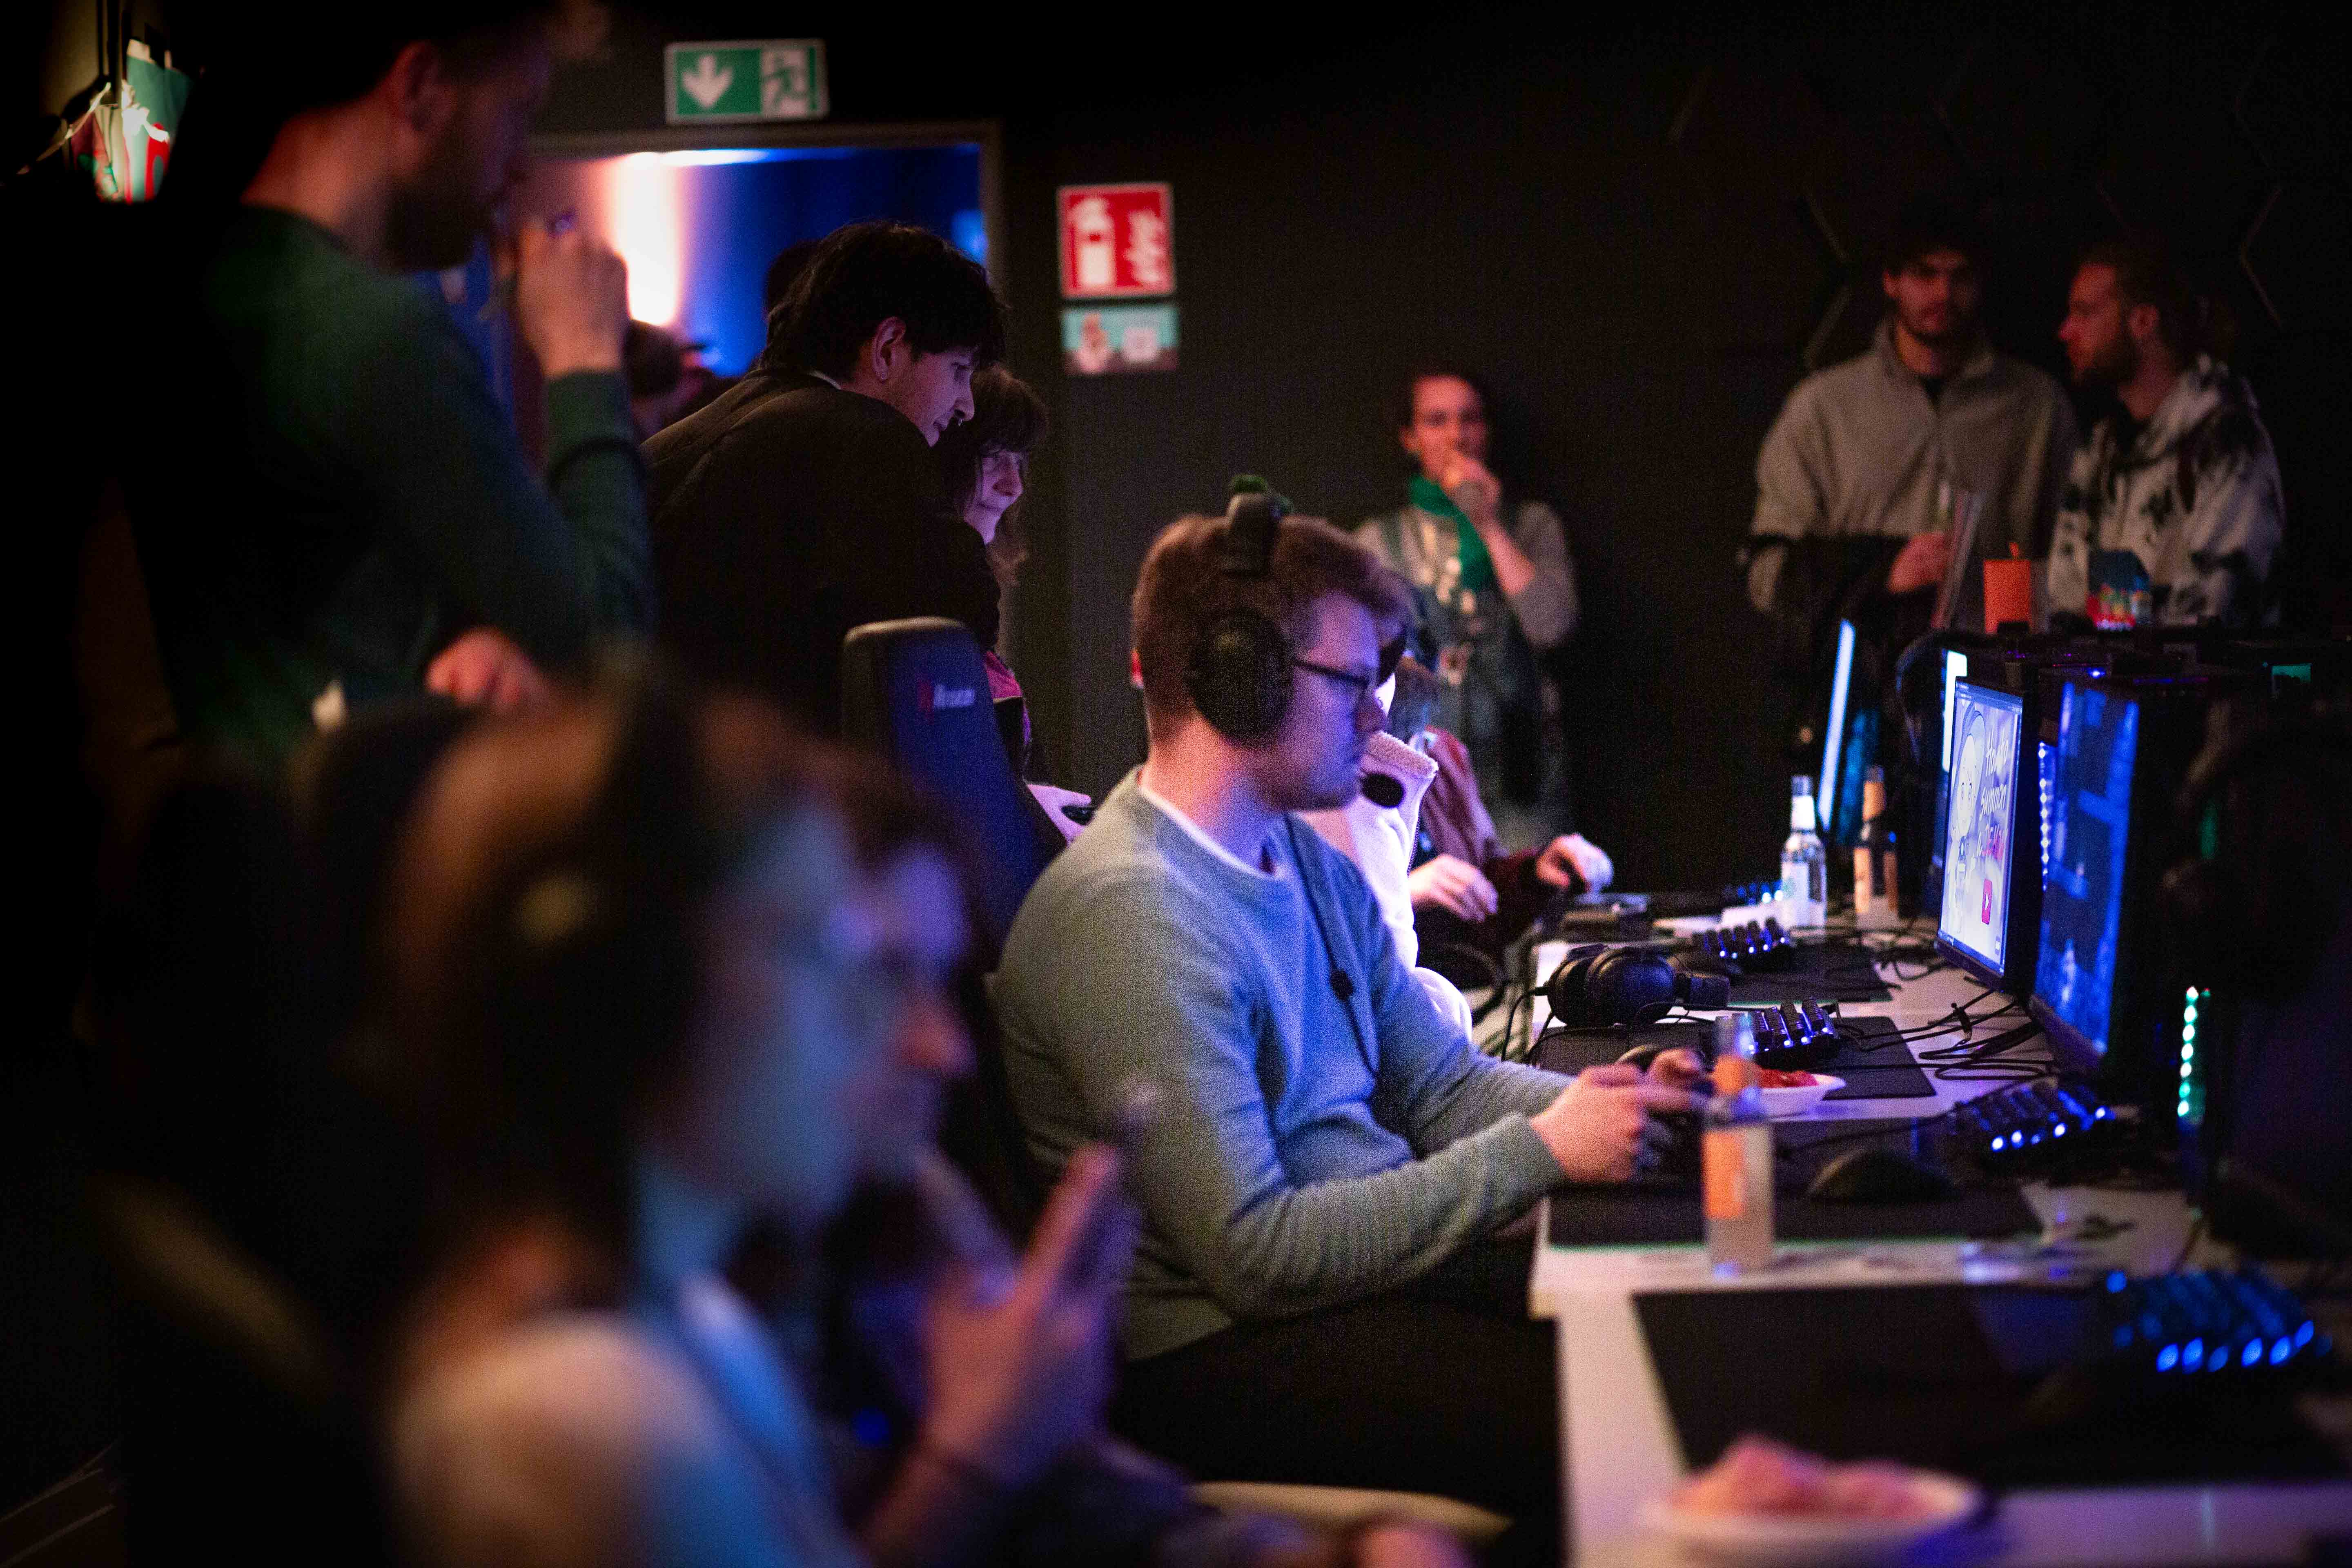 Every participating game had two to three play stations to offer, so no one had to wait long for their session.